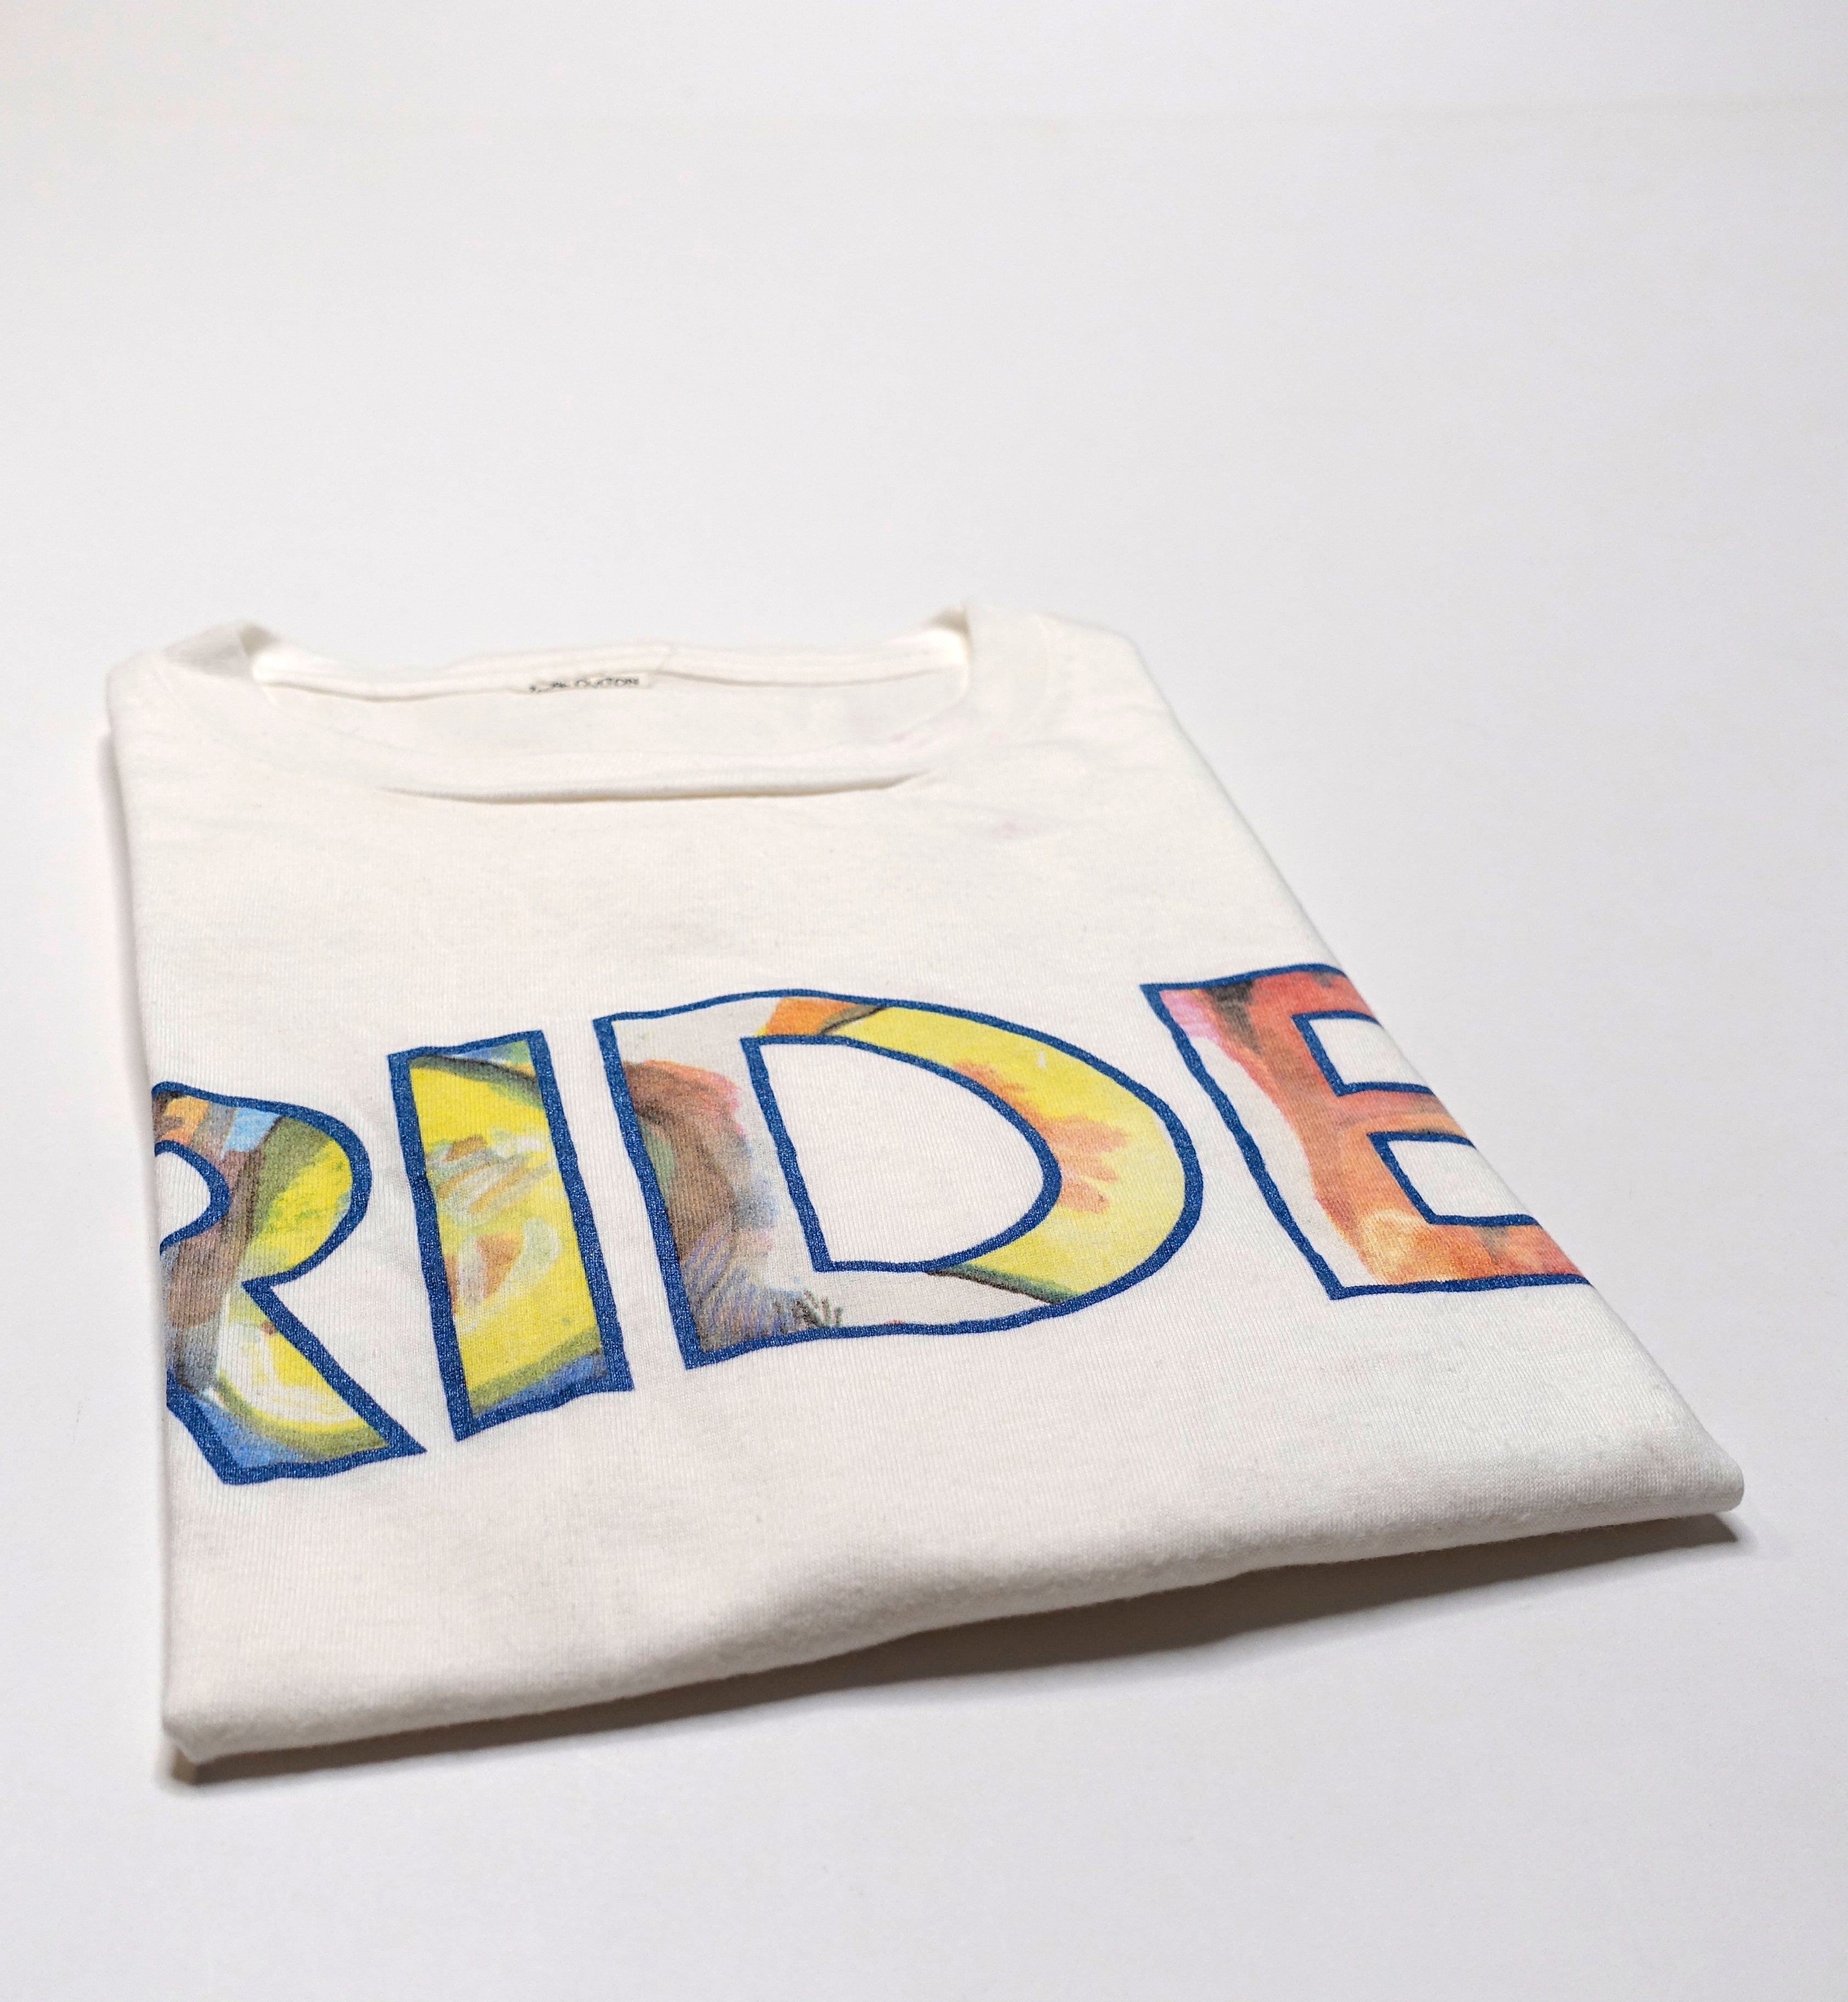 Ride - Going Blank Again 1992 Tour Shirt Size XL / Large